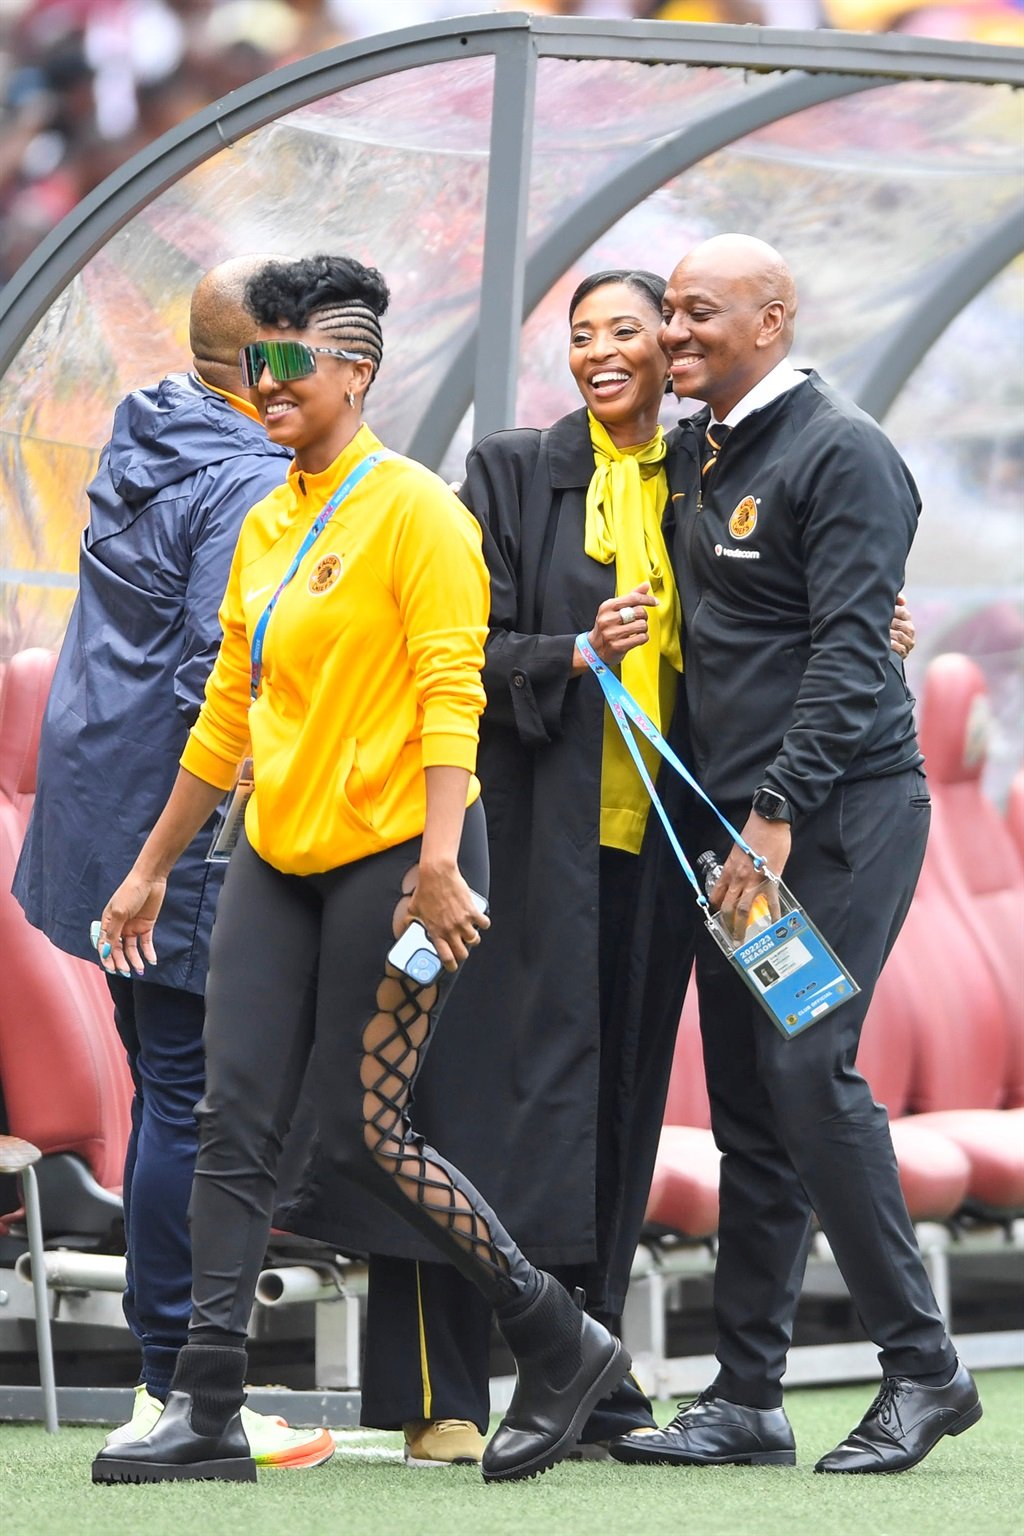 JOHANNESBURG, SOUTH AFRICA - MAY 06:   Kaizer Motaung jnr, Jessica Motaung and Kemiso Motaung During the Nedbank Cup semi final match between Kaizer Chiefs and Orlando Pirates at FNB Stadium on May 06, 2023 in Johannesburg, South Africa. (Photo by Lefty Shivambu/Gallo Images)